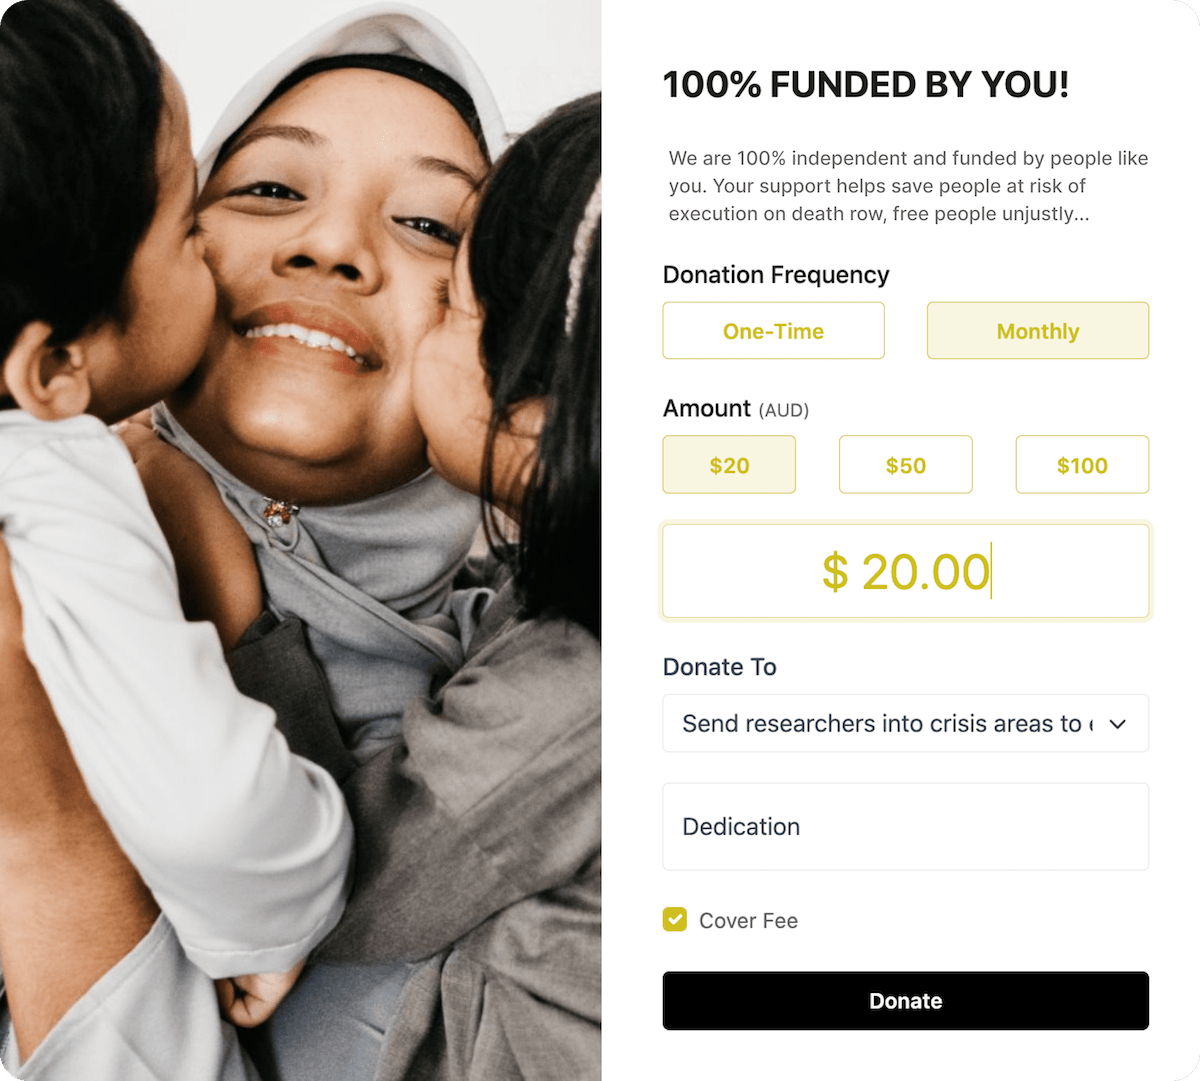 A fundraising form with an image of a mother and 2 kids